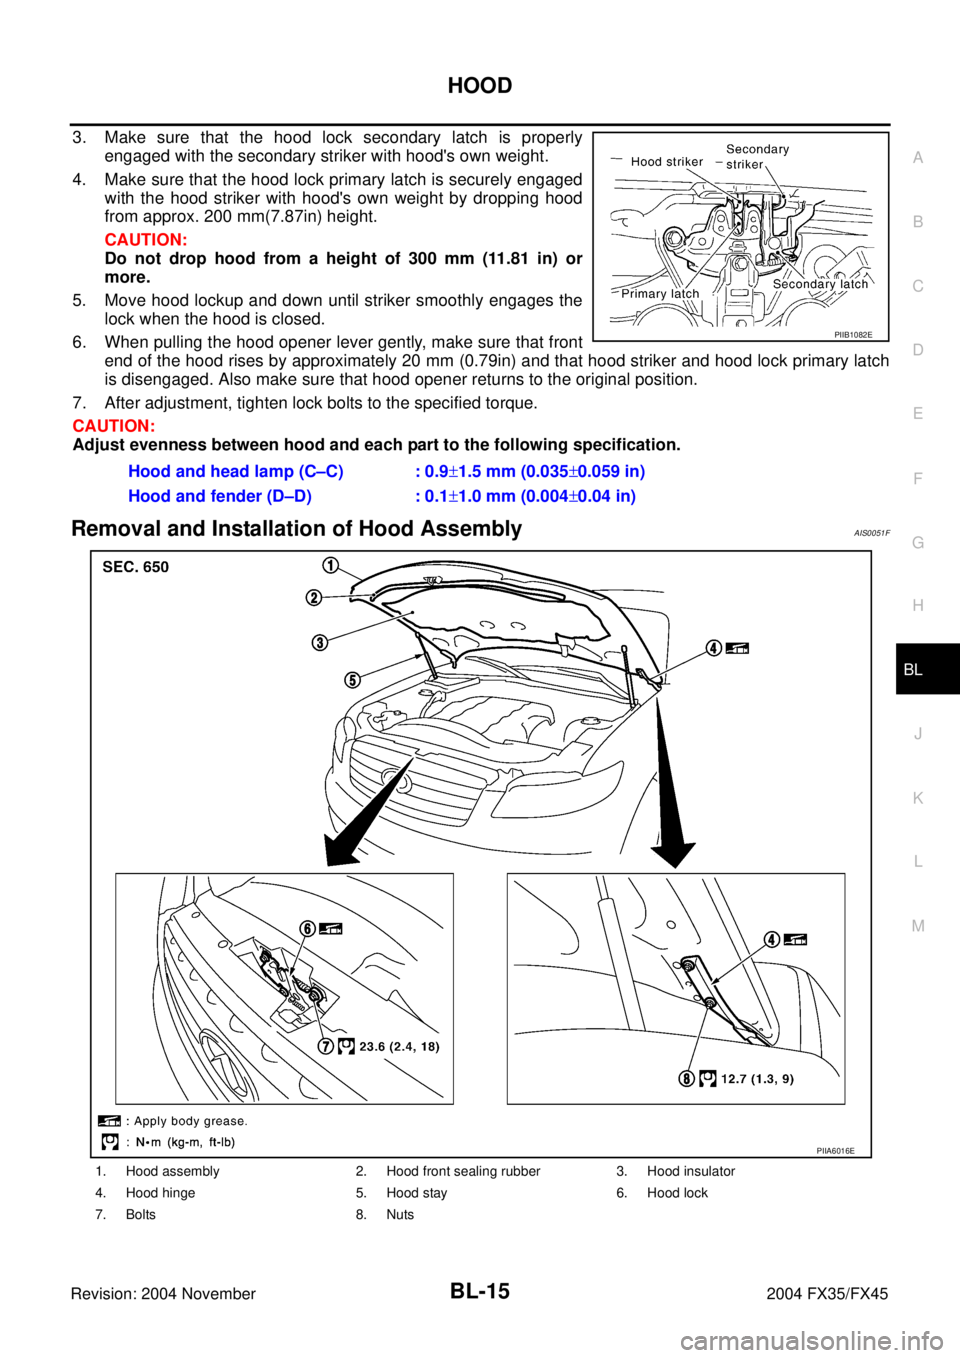 INFINITI FX35 2004  Service Manual HOOD
BL-15
C
D
E
F
G
H
J
K
L
MA
B
BL
Revision: 2004 November 2004 FX35/FX45
3. Make sure that the hood lock secondary latch is properly
engaged with the secondary striker with hoods own weight.
4. Ma